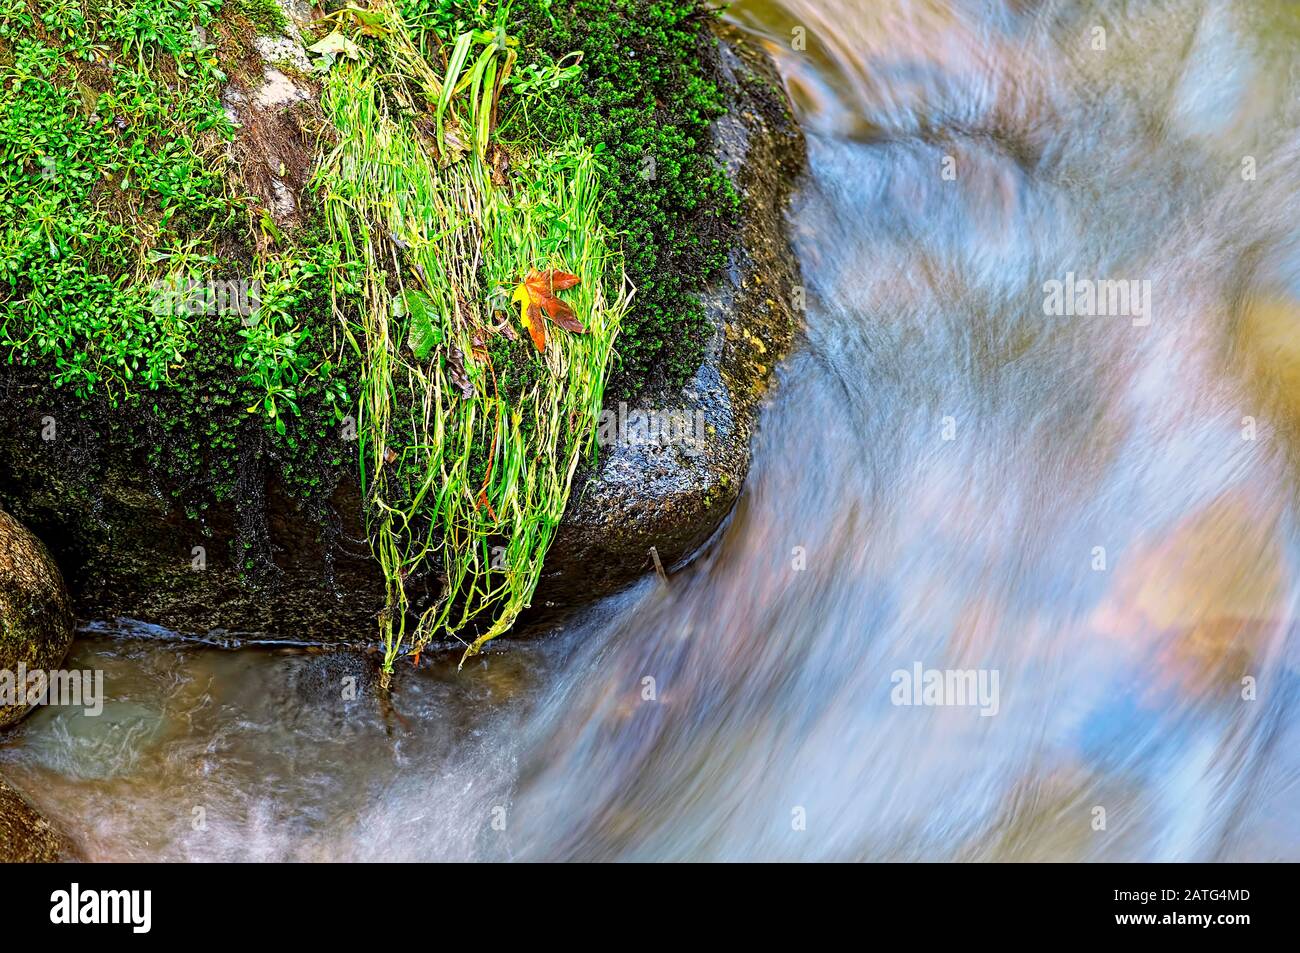 Safe Landing is a photograph of a maple leaf safely landed on a clump of wet grass on a boulder in Kanaka Creek, Maple Ridge, British Columbia, Canada. Stock Photo